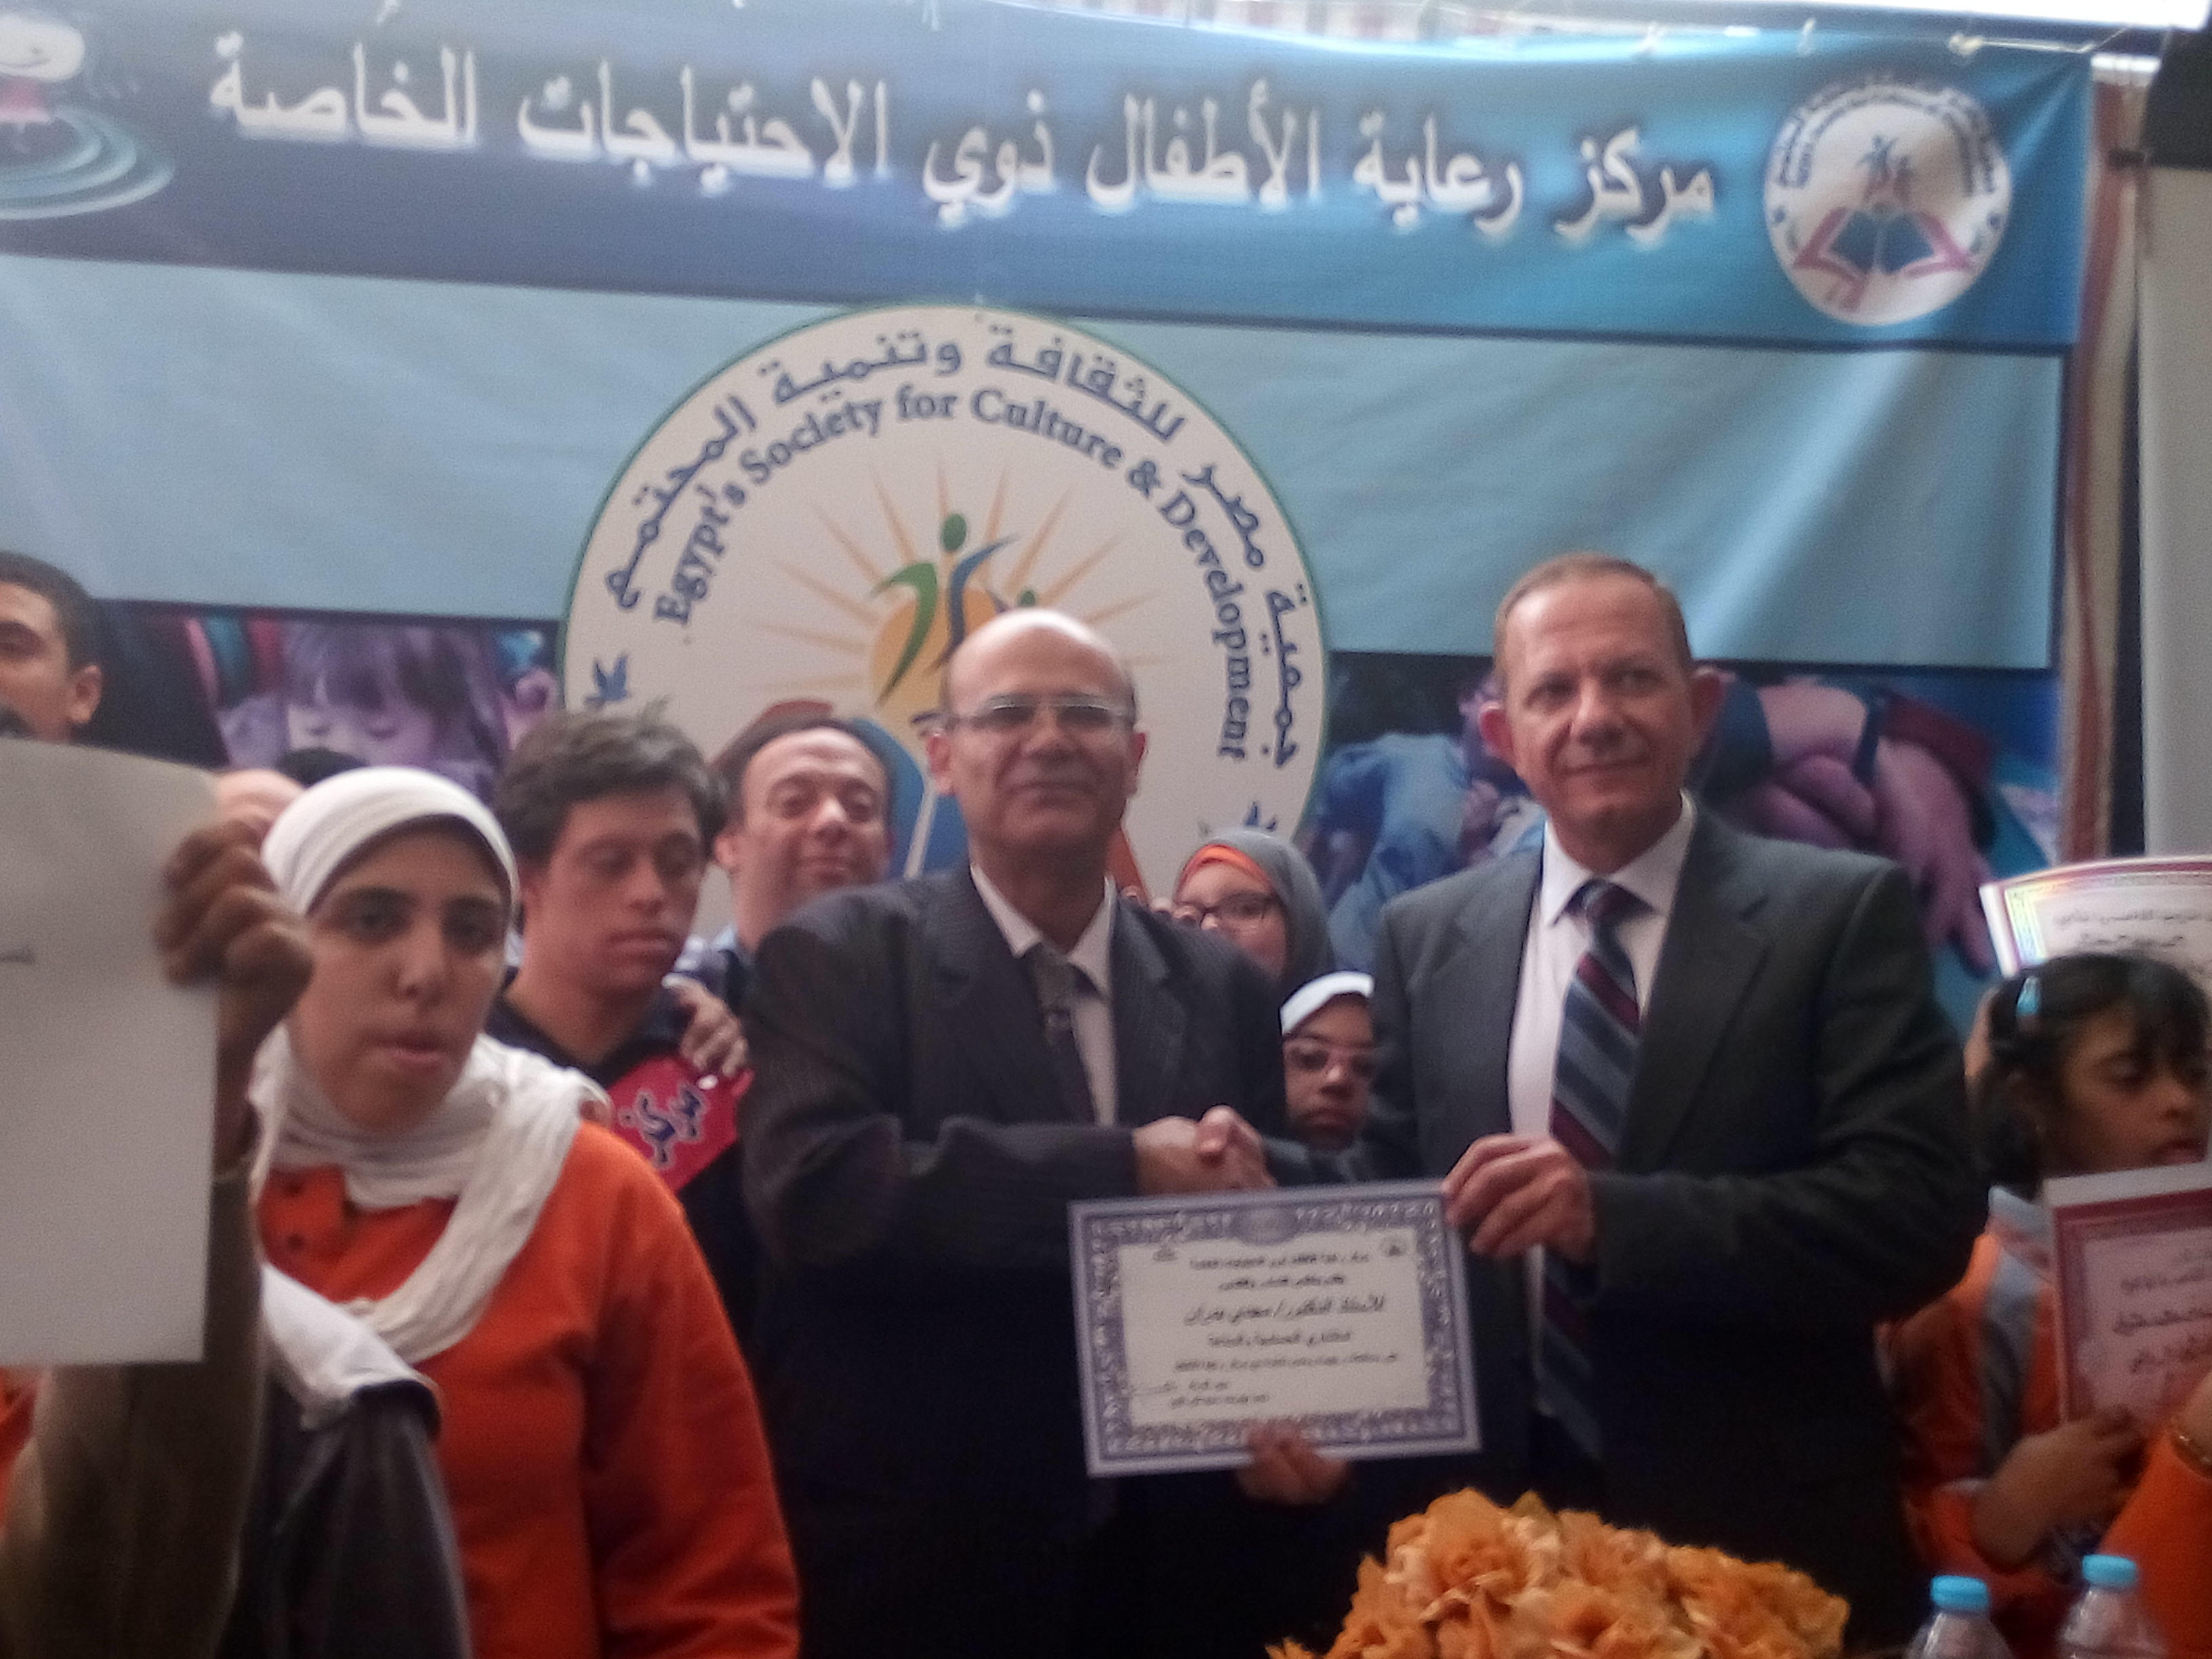 Celebrating the World Down Syndrome Day at Zeitoun Center for Children with Special Needs